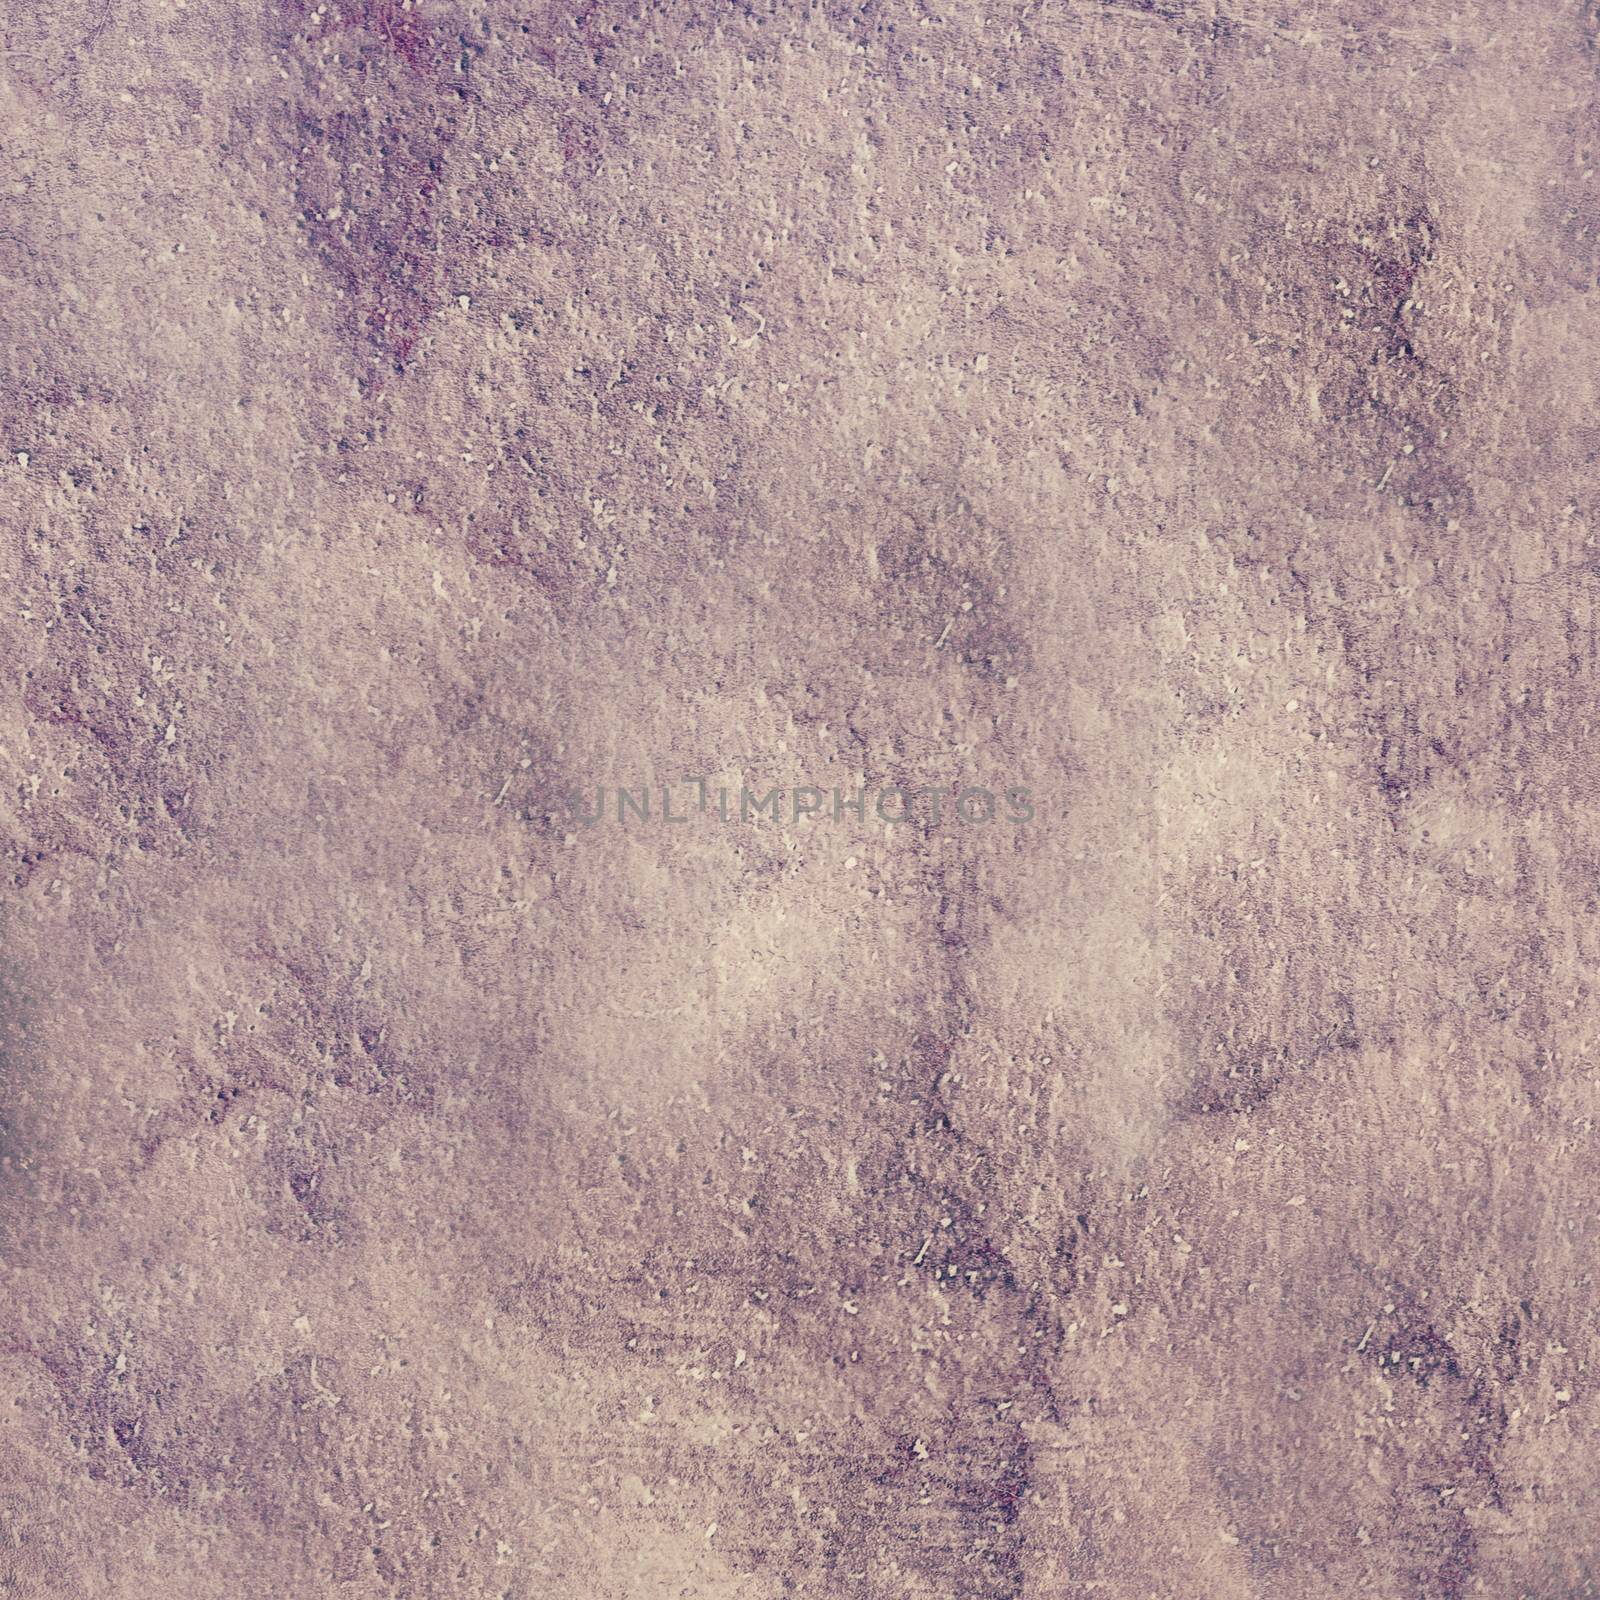 Rough uneven wall with a textured surface of purple color.Texture or background